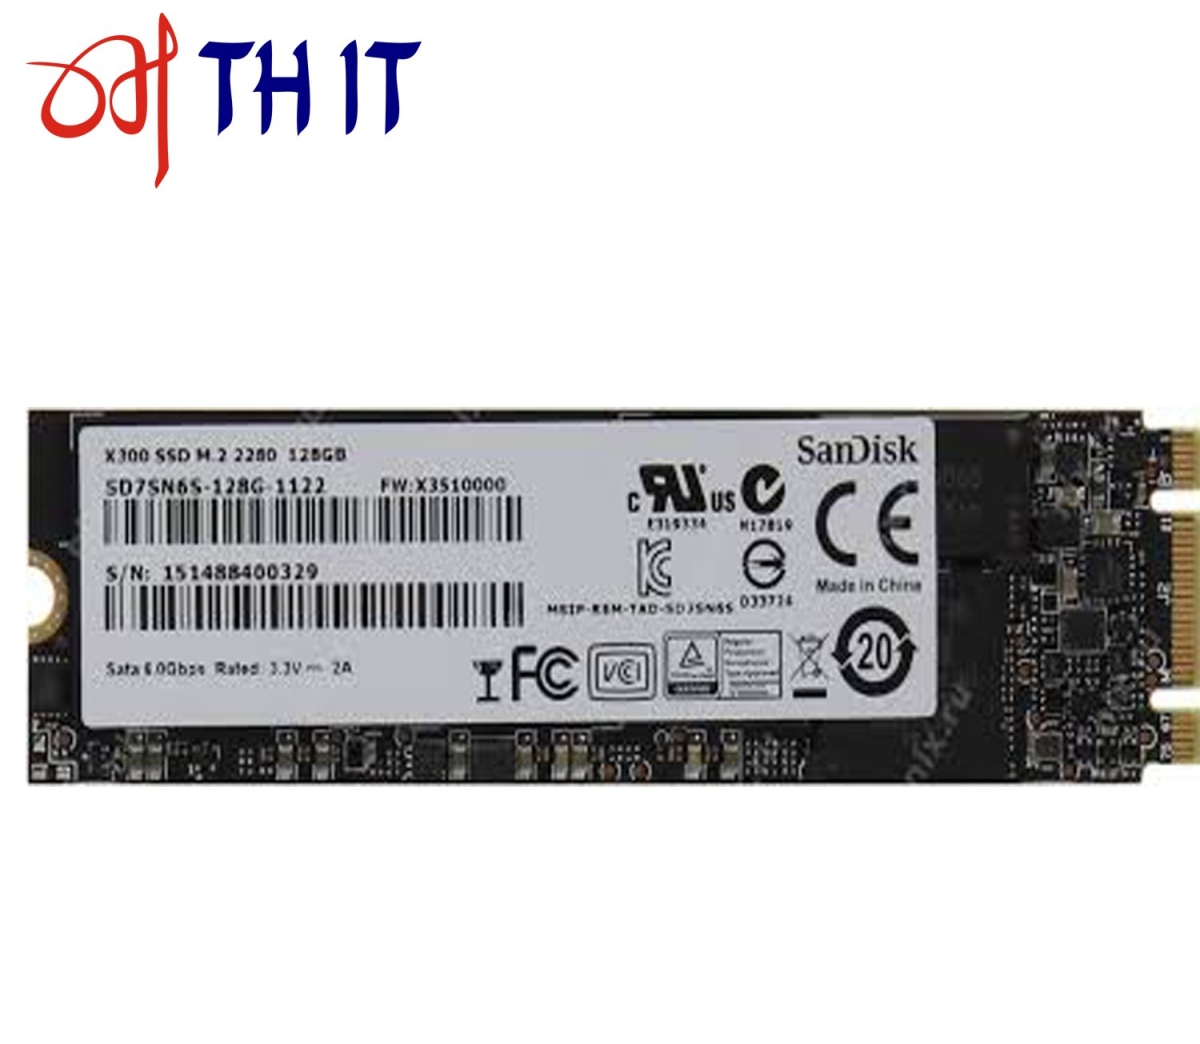 SanDisk SSD M.2 2280 X300 128GB (Used Item) Used Item/Stock Clearance Sales  Selangor, Malaysia, Kuala Lumpur (KL), Shah Alam Supplier, Rental, Supply,  Supplies | TH IT RESOURCE CENTRE SDN BHD